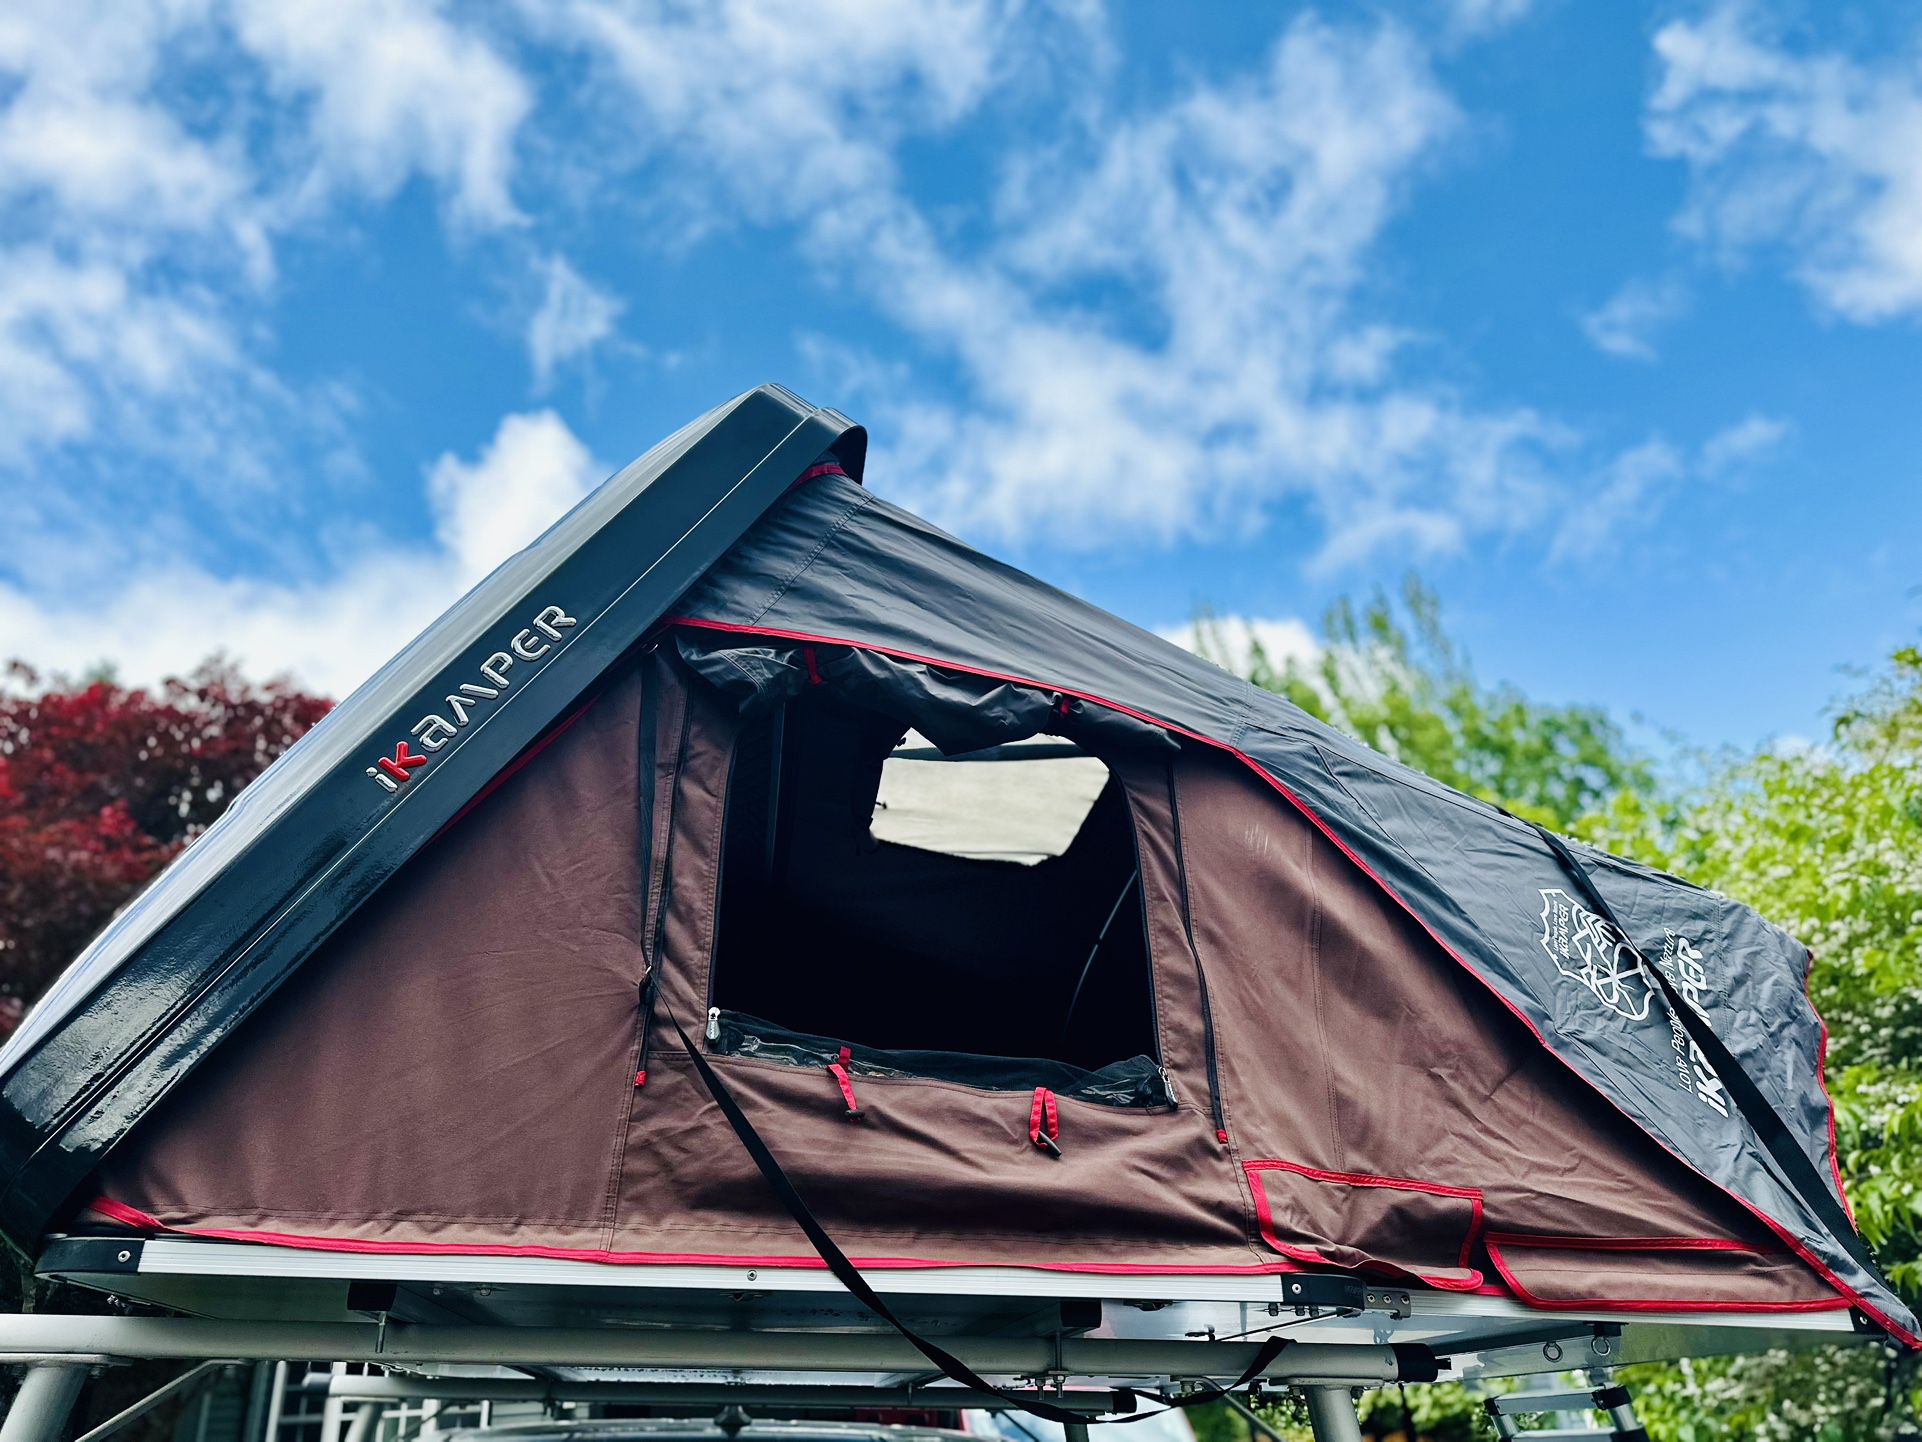 iKamper Skycamp 2.0 w/Annex Room and Awning